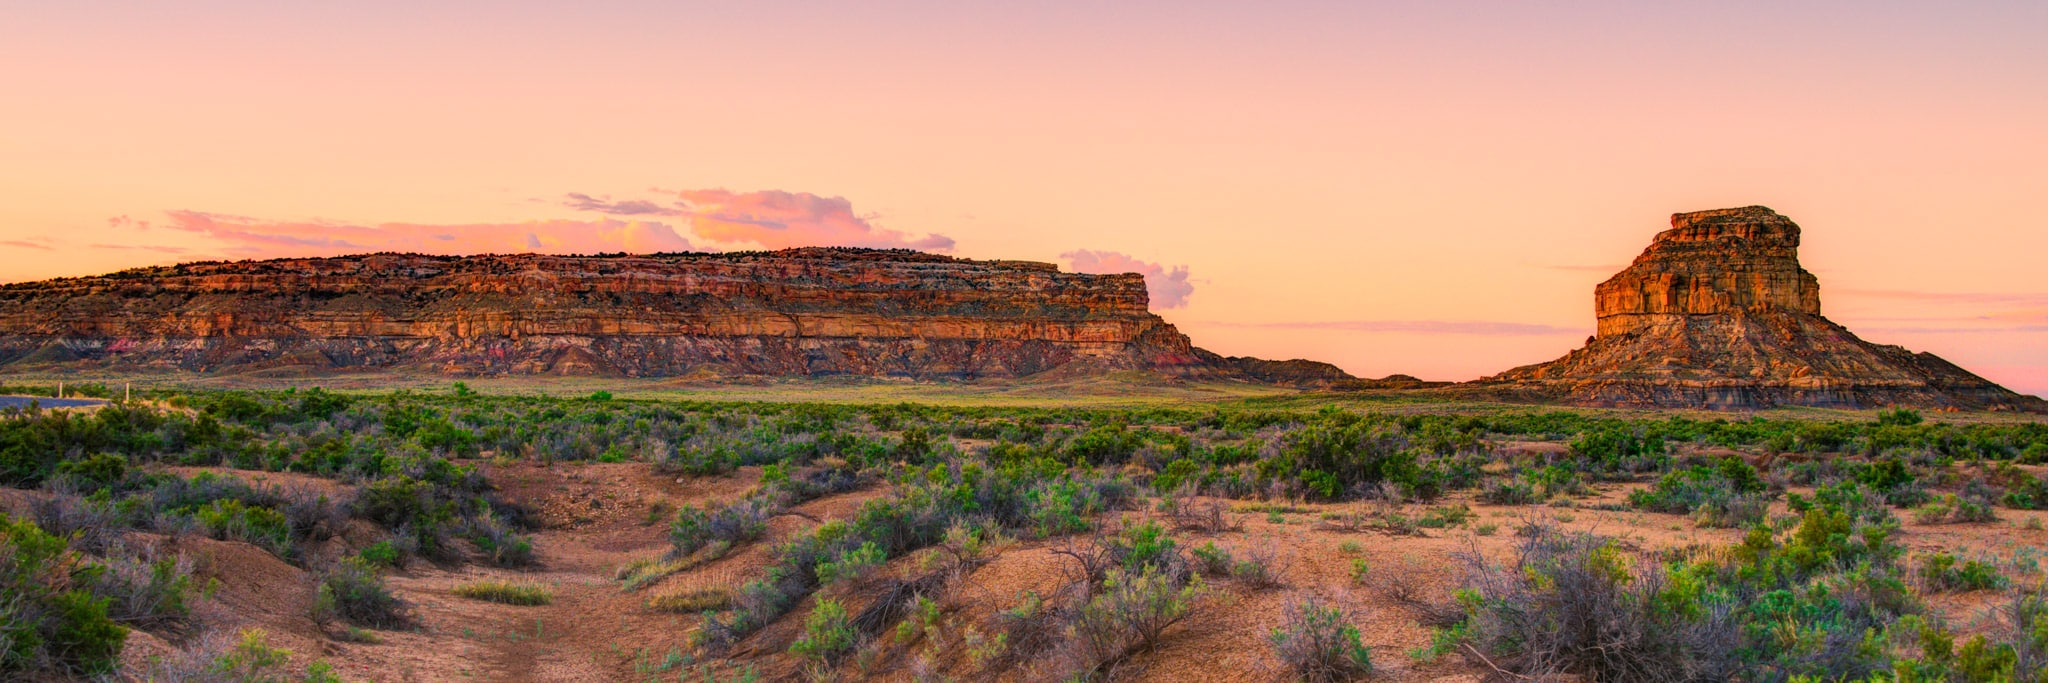 Dawn Panorama of Fajada Butte located in Chaco Canyon, New Mexico.